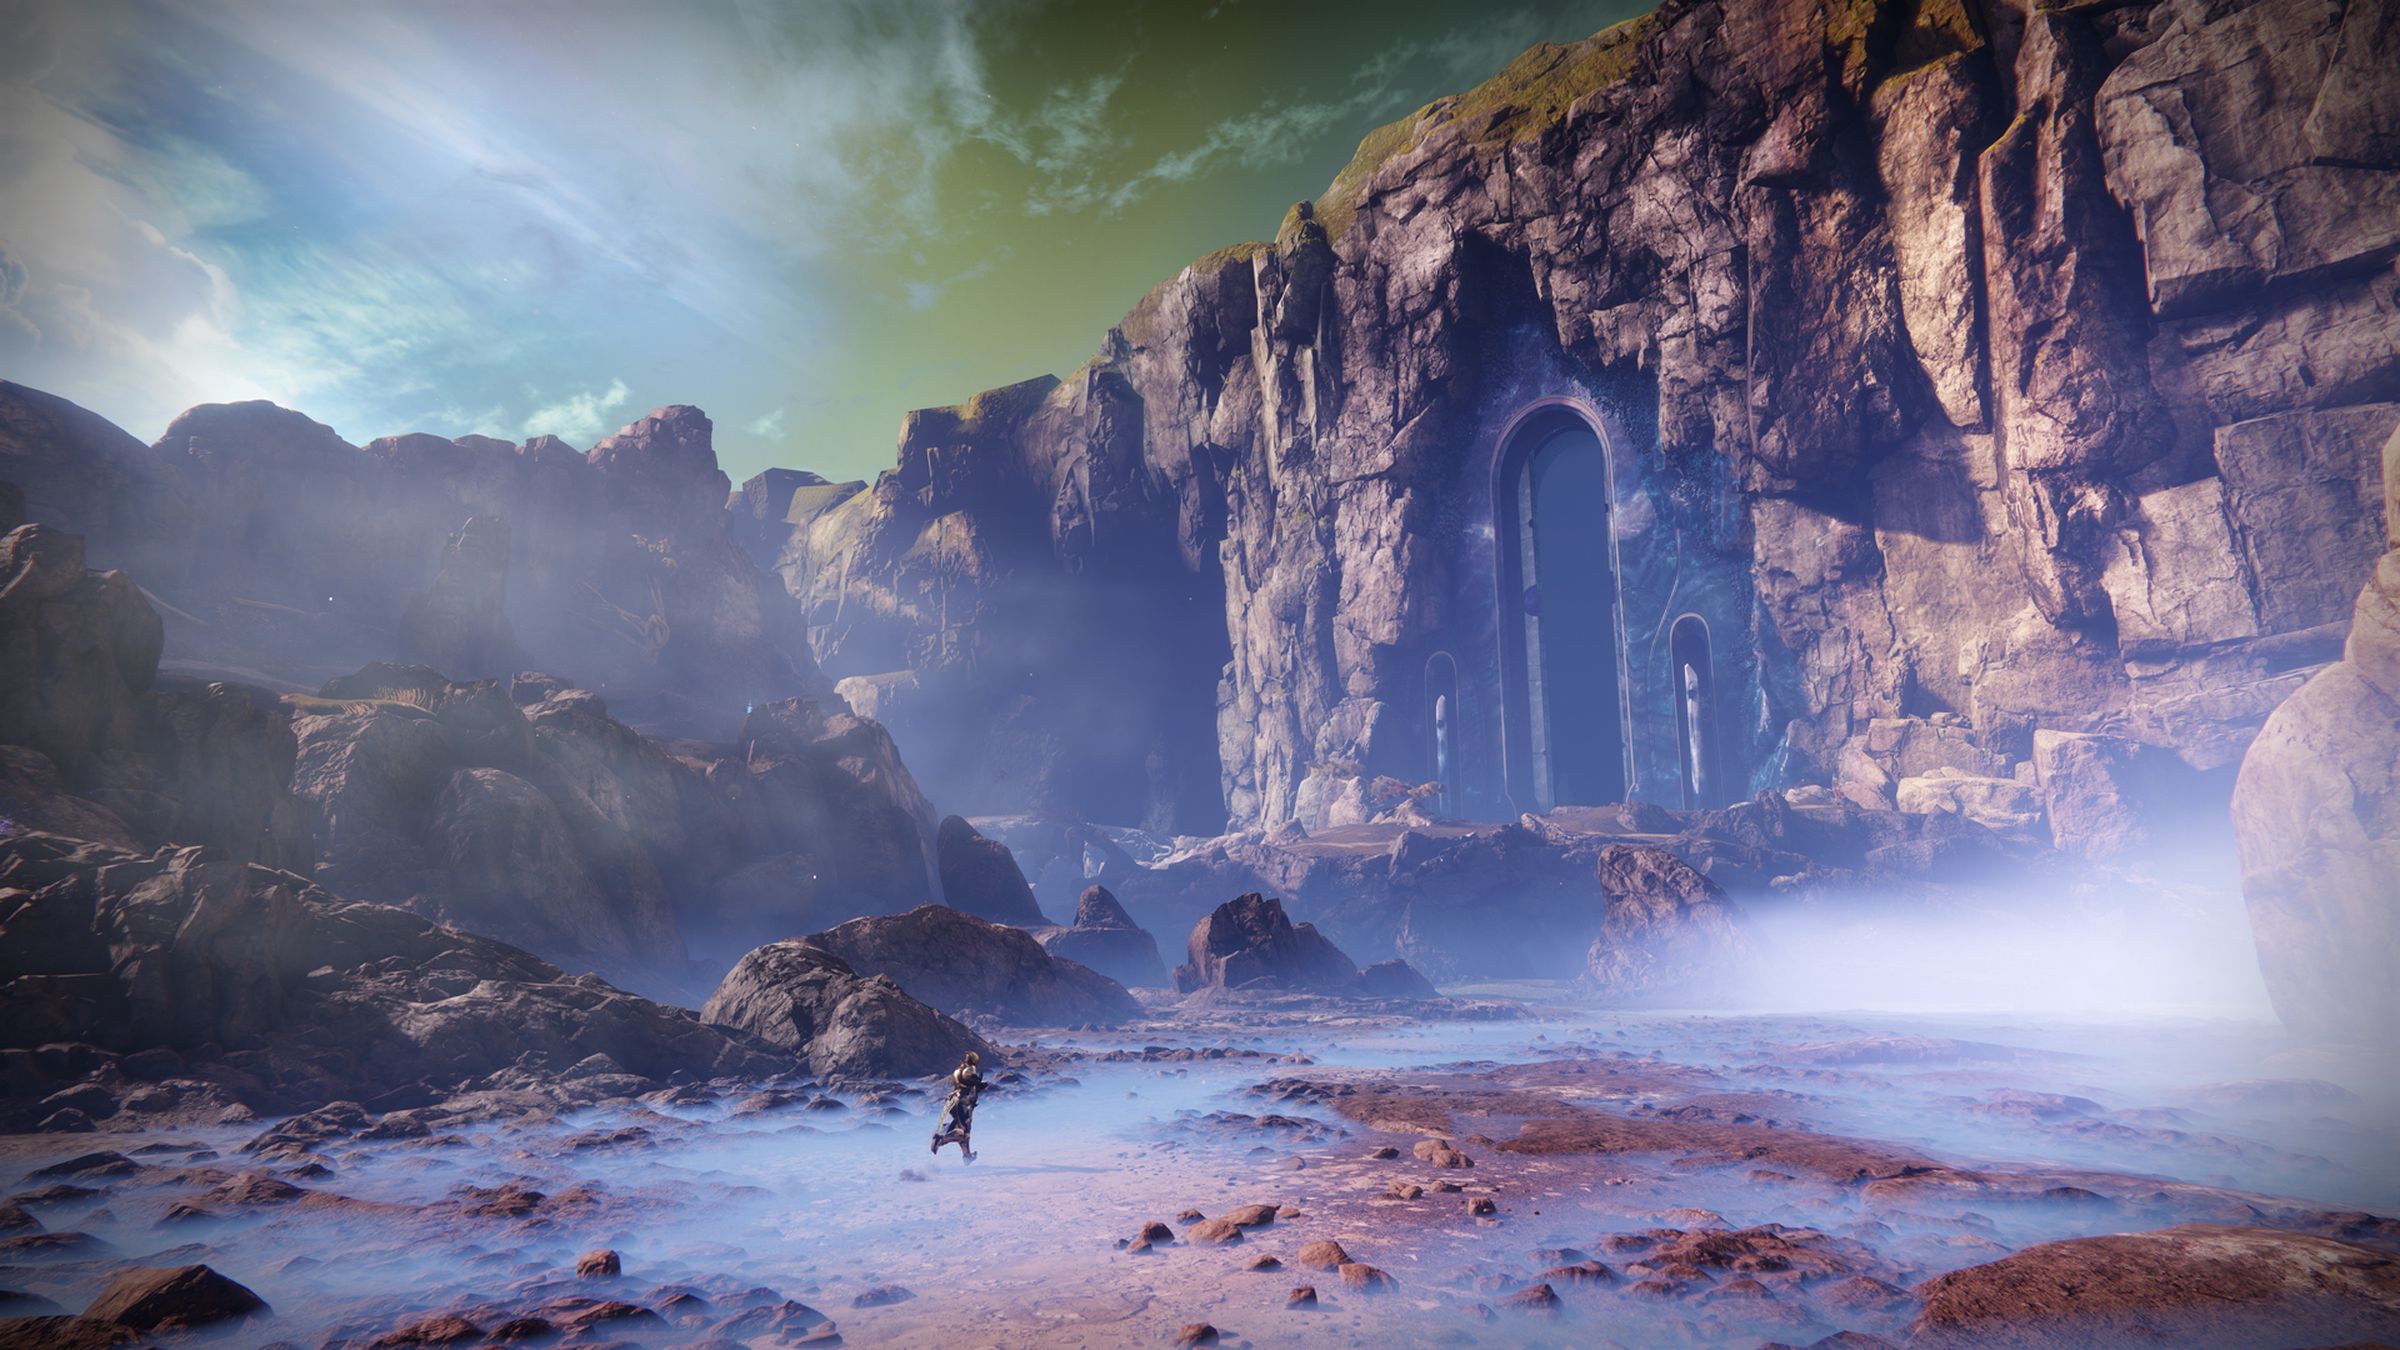 The Dreaming City, a new destination in Forsaken that will house the expansion’s raid encounter, is one of the most visually stunning environments Bungie has ever created. 